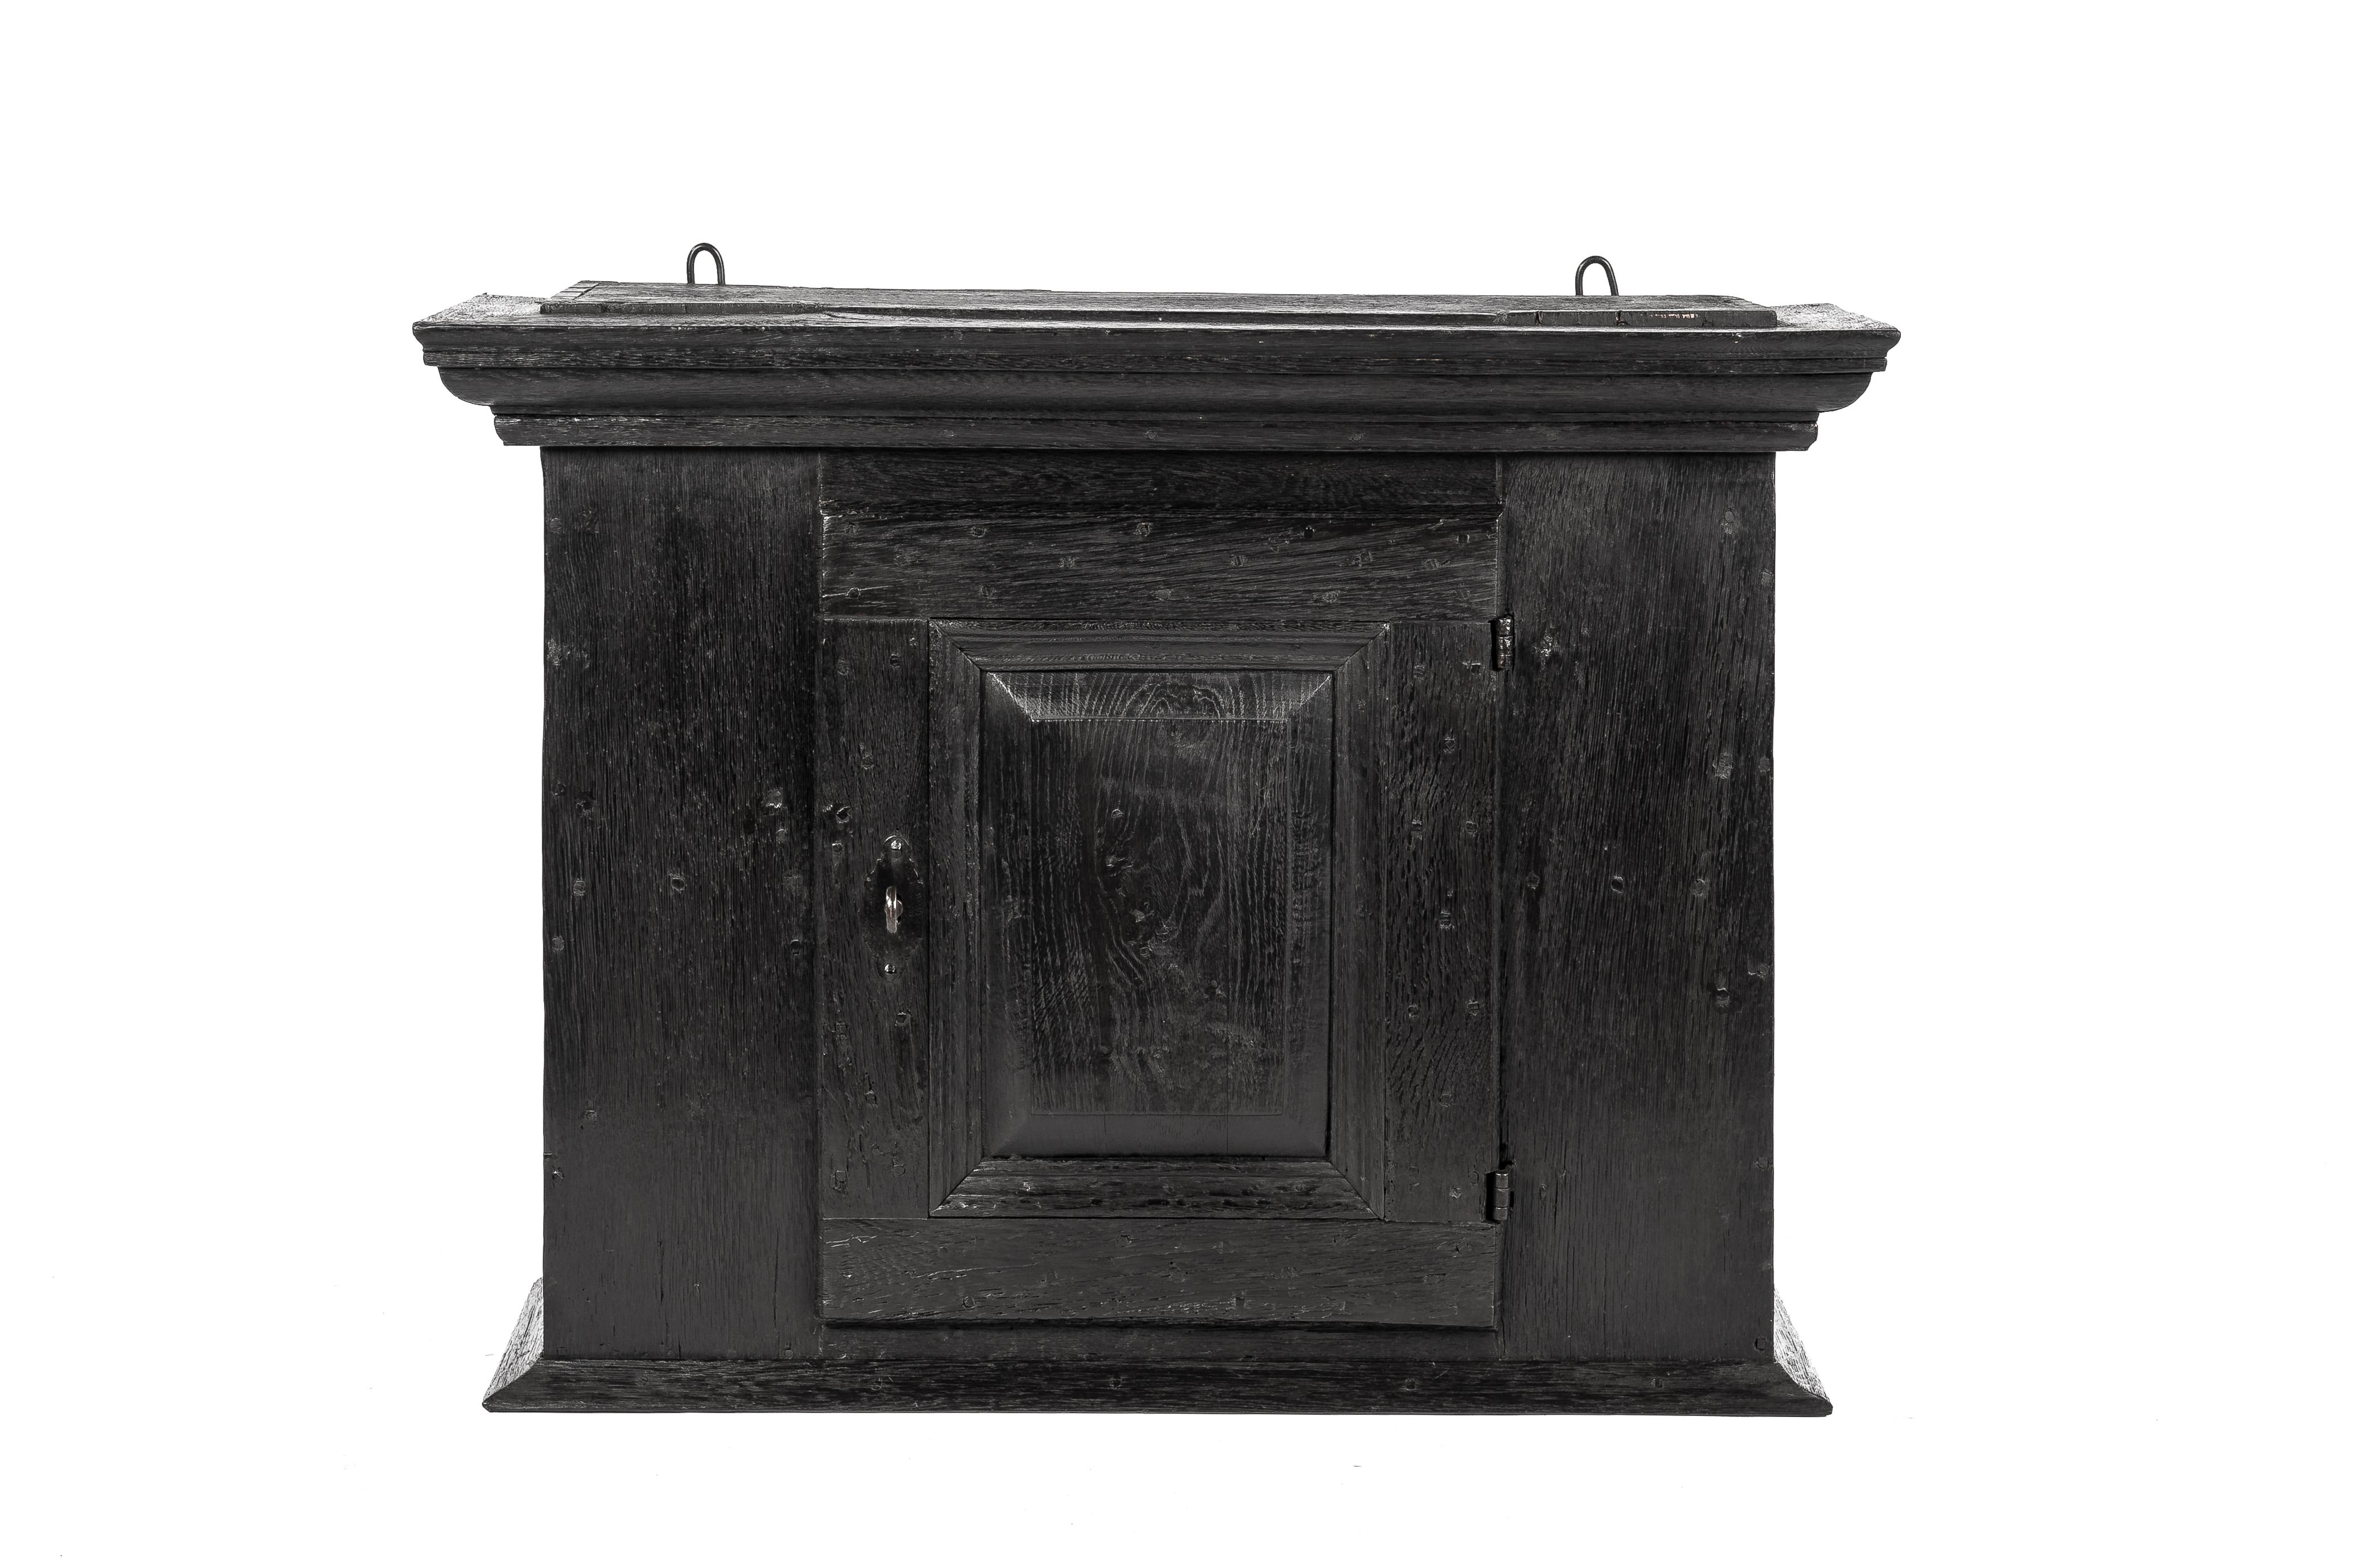 This is a beautiful wall-hanging cabinet that was made in Germany in the late 18th century. It was completely made in solid European oak and stained almost black. The cabinet has its original forged steel hinges and keyplate. Its lock and key were